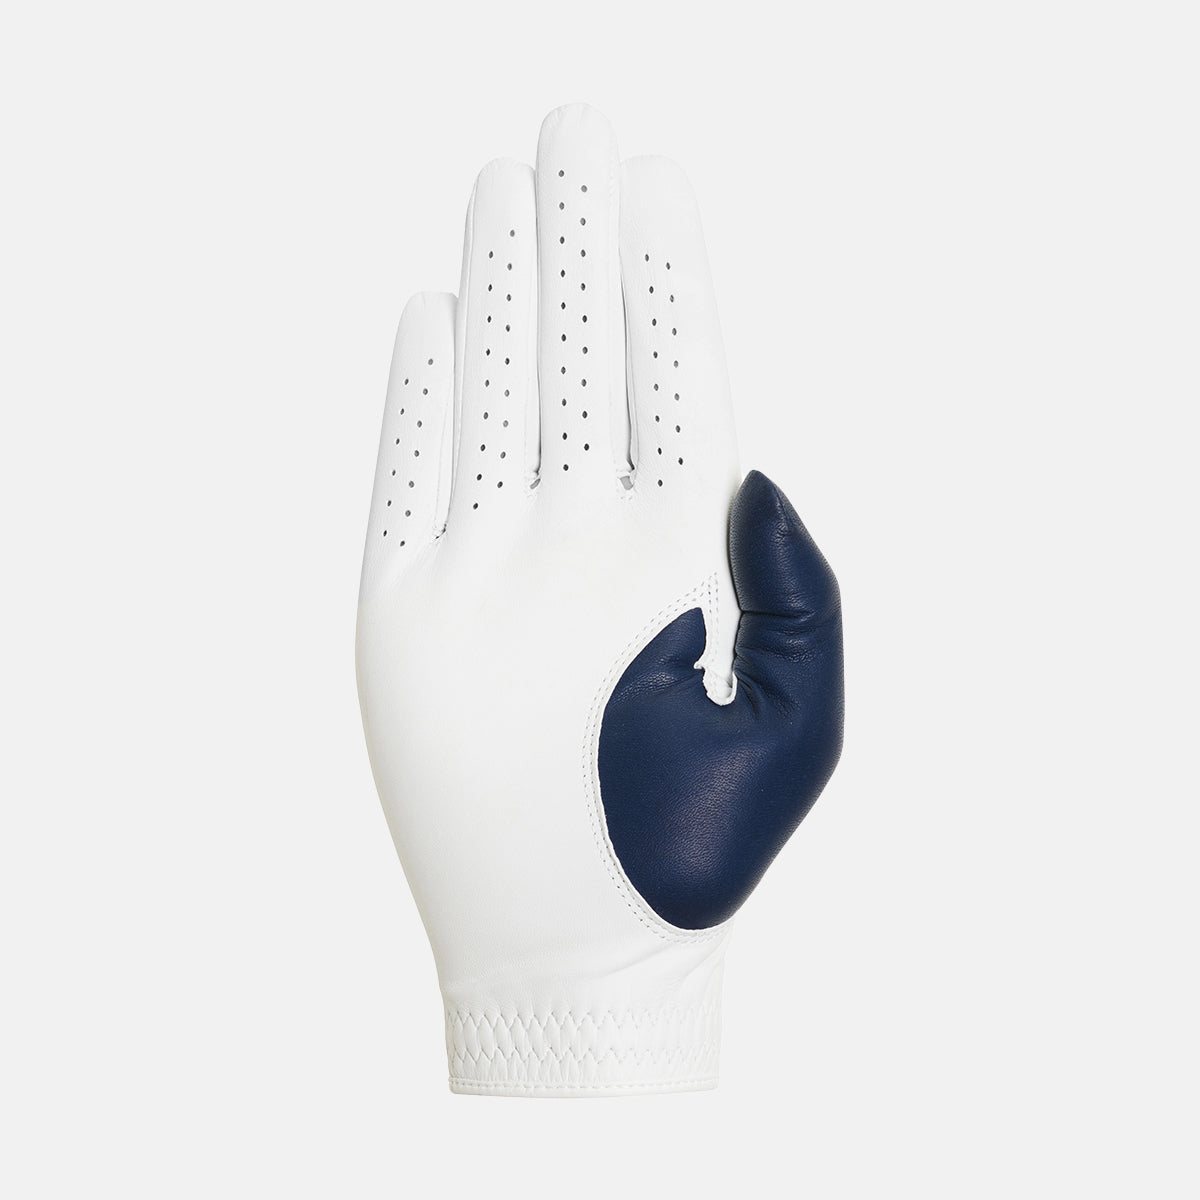 Elite pro sentosa left-handed white men's golf glove for tour-level player's with quick drying technology